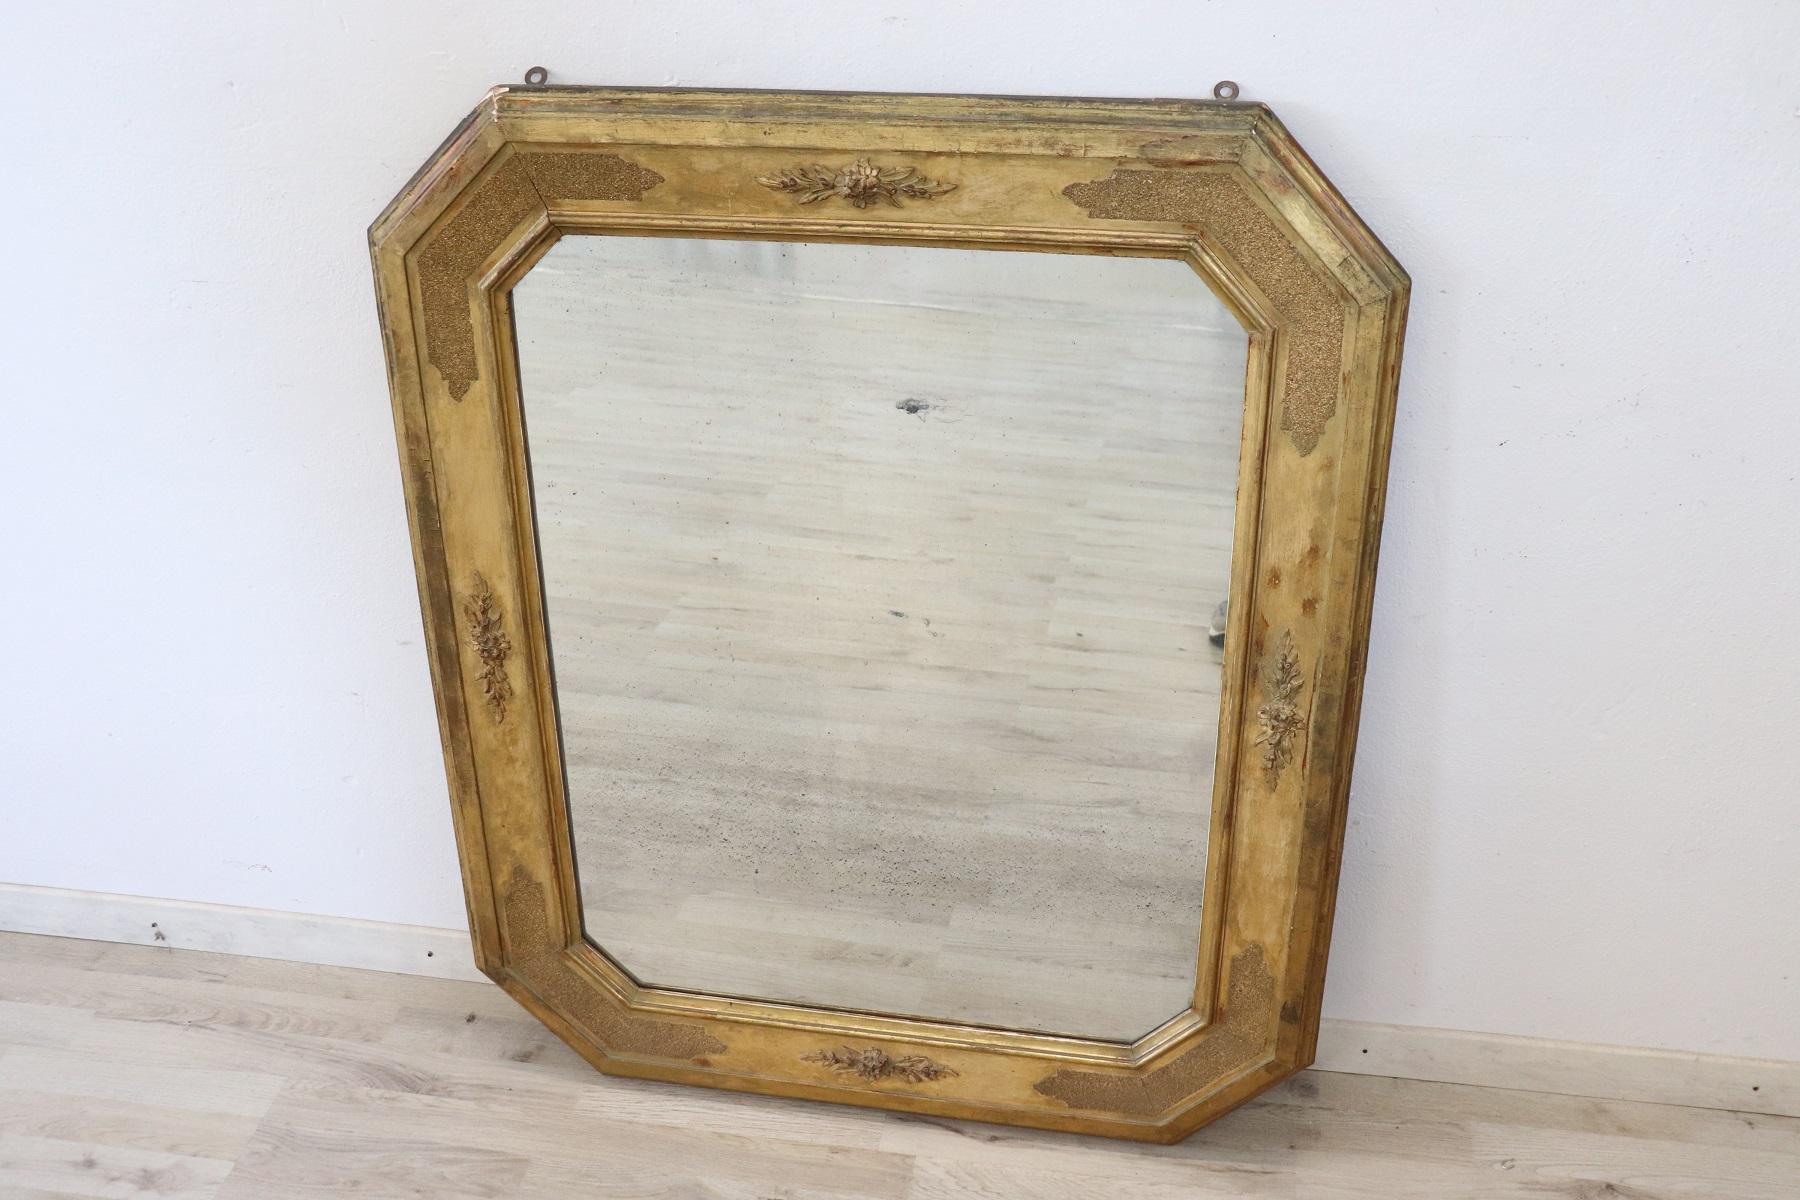 Elegant 19th century Italian antique gilded wood wall mirror 1850s with refined decoration. Used conditions. Elegant in every room of your home.